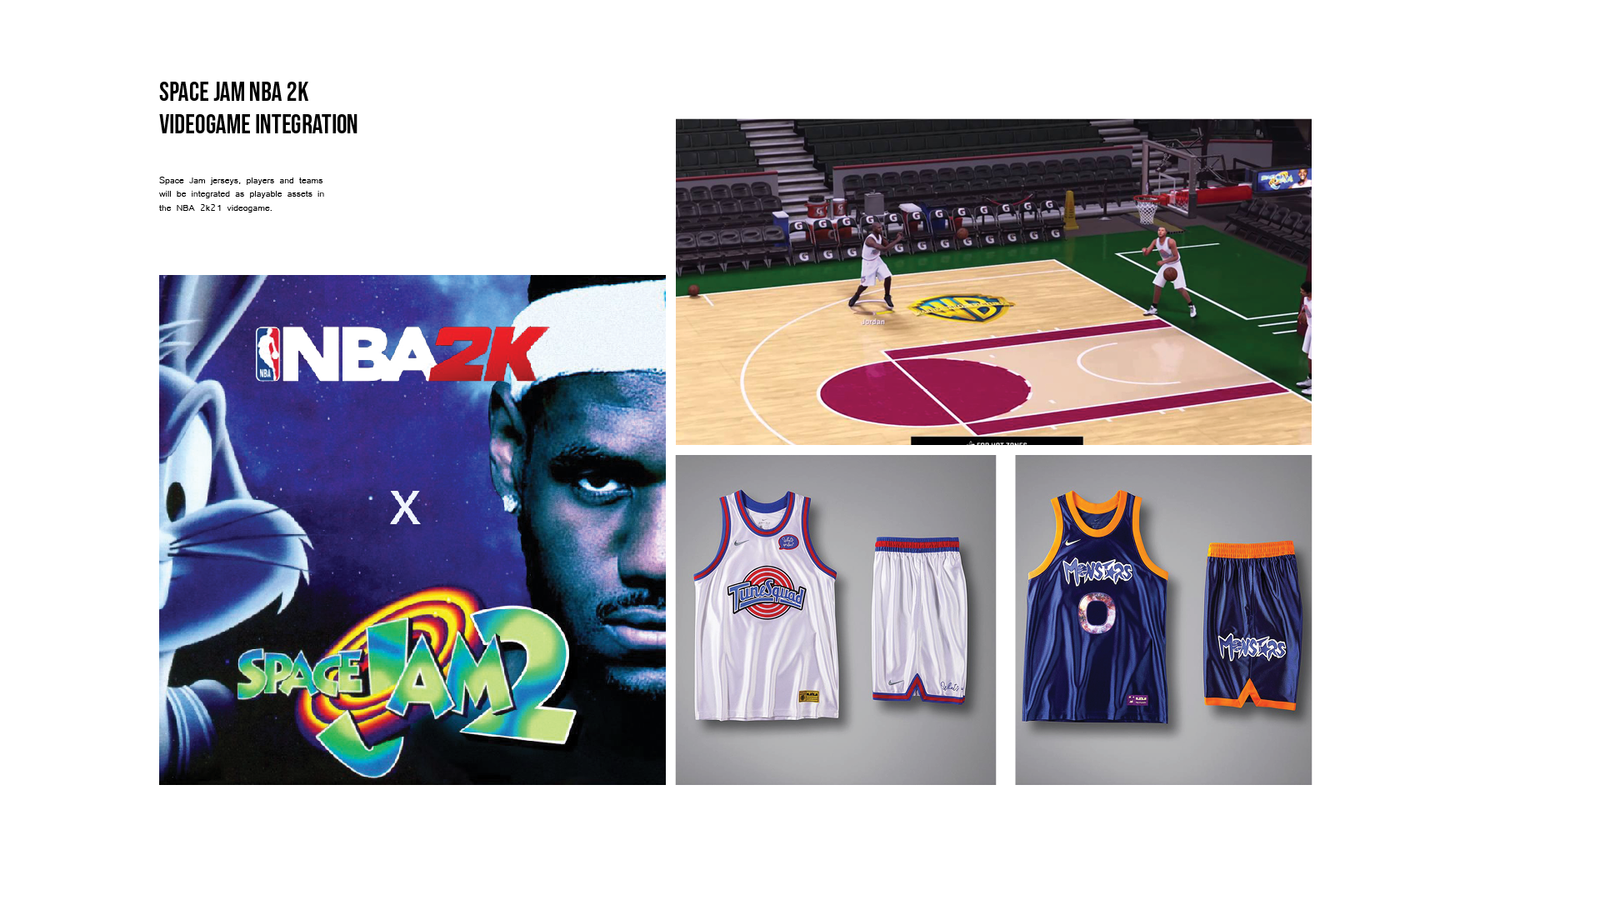 The Tune Squad and Monstars will be playable teams in the next NBA 2K basketball game.